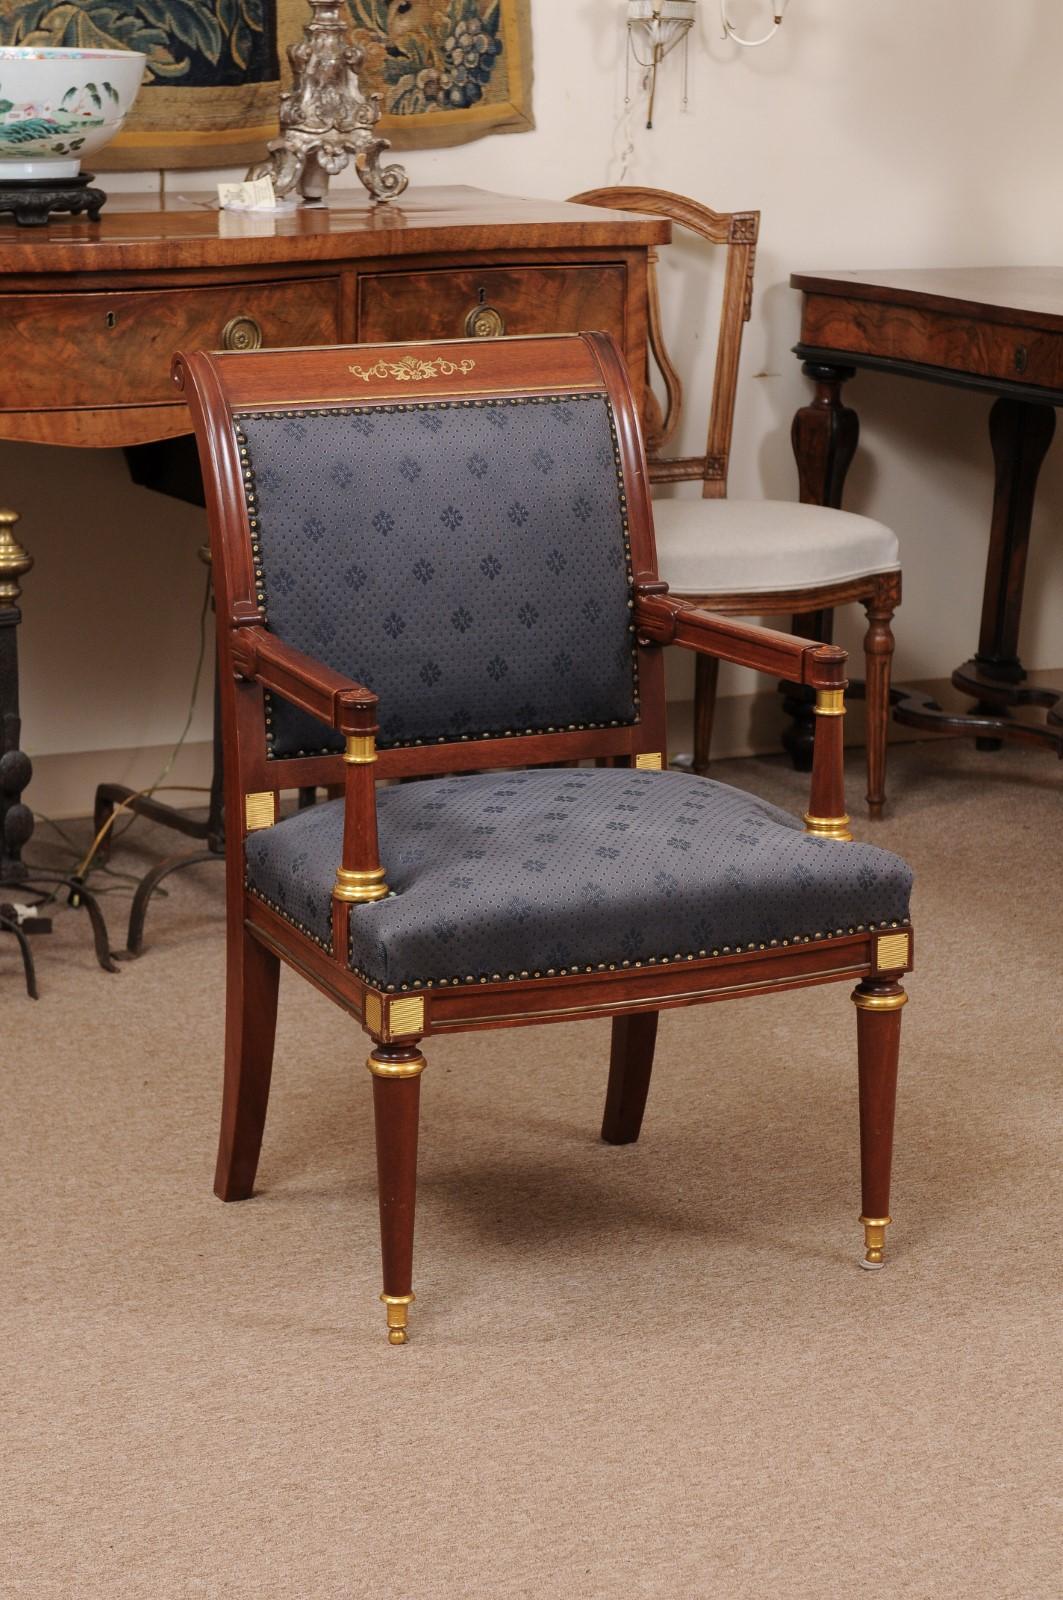 Neoclassical style mahogany open arm chair/fauteuil with ormolu mounts, rounded tapering legs, and navy blue upholstery, 20th century.